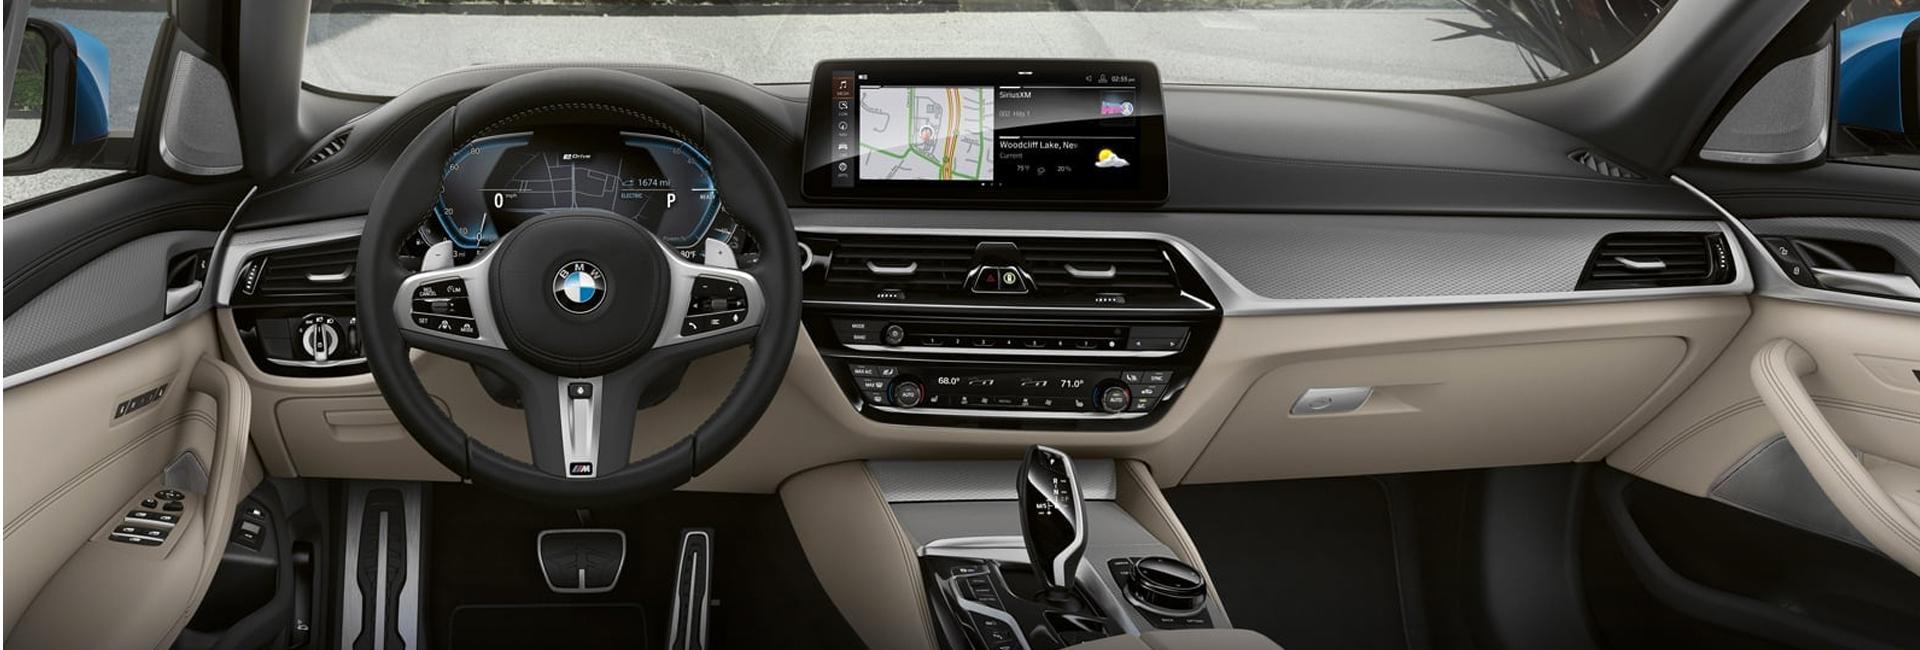 Full interior view of the 2021 BMW 5 Series